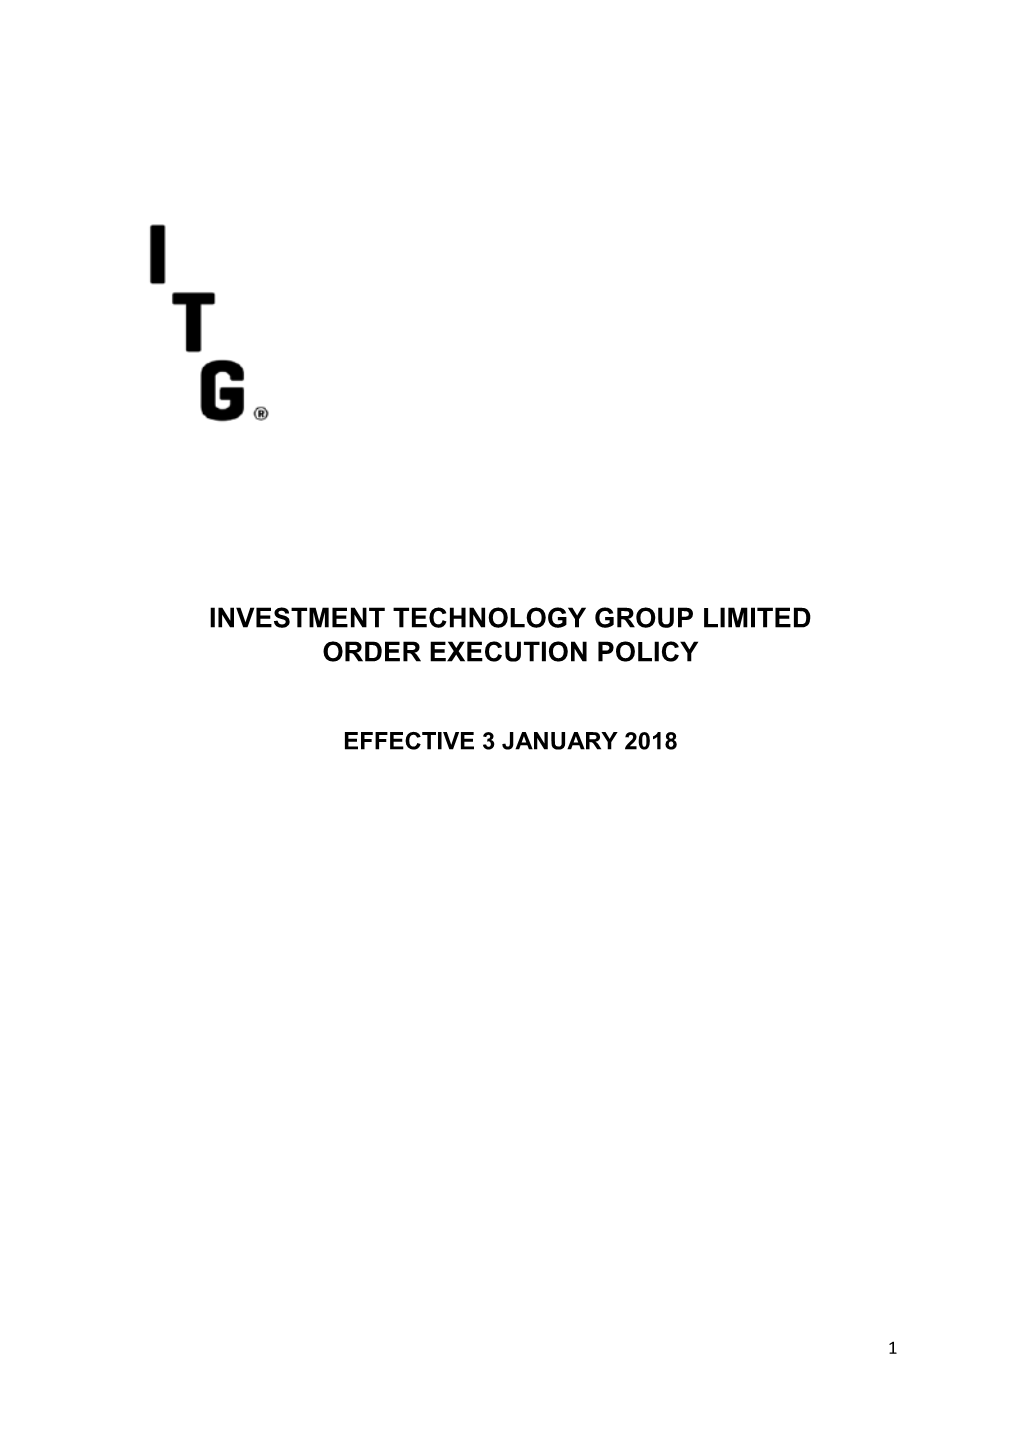 Investment Technology Group Limited Order Execution Policy